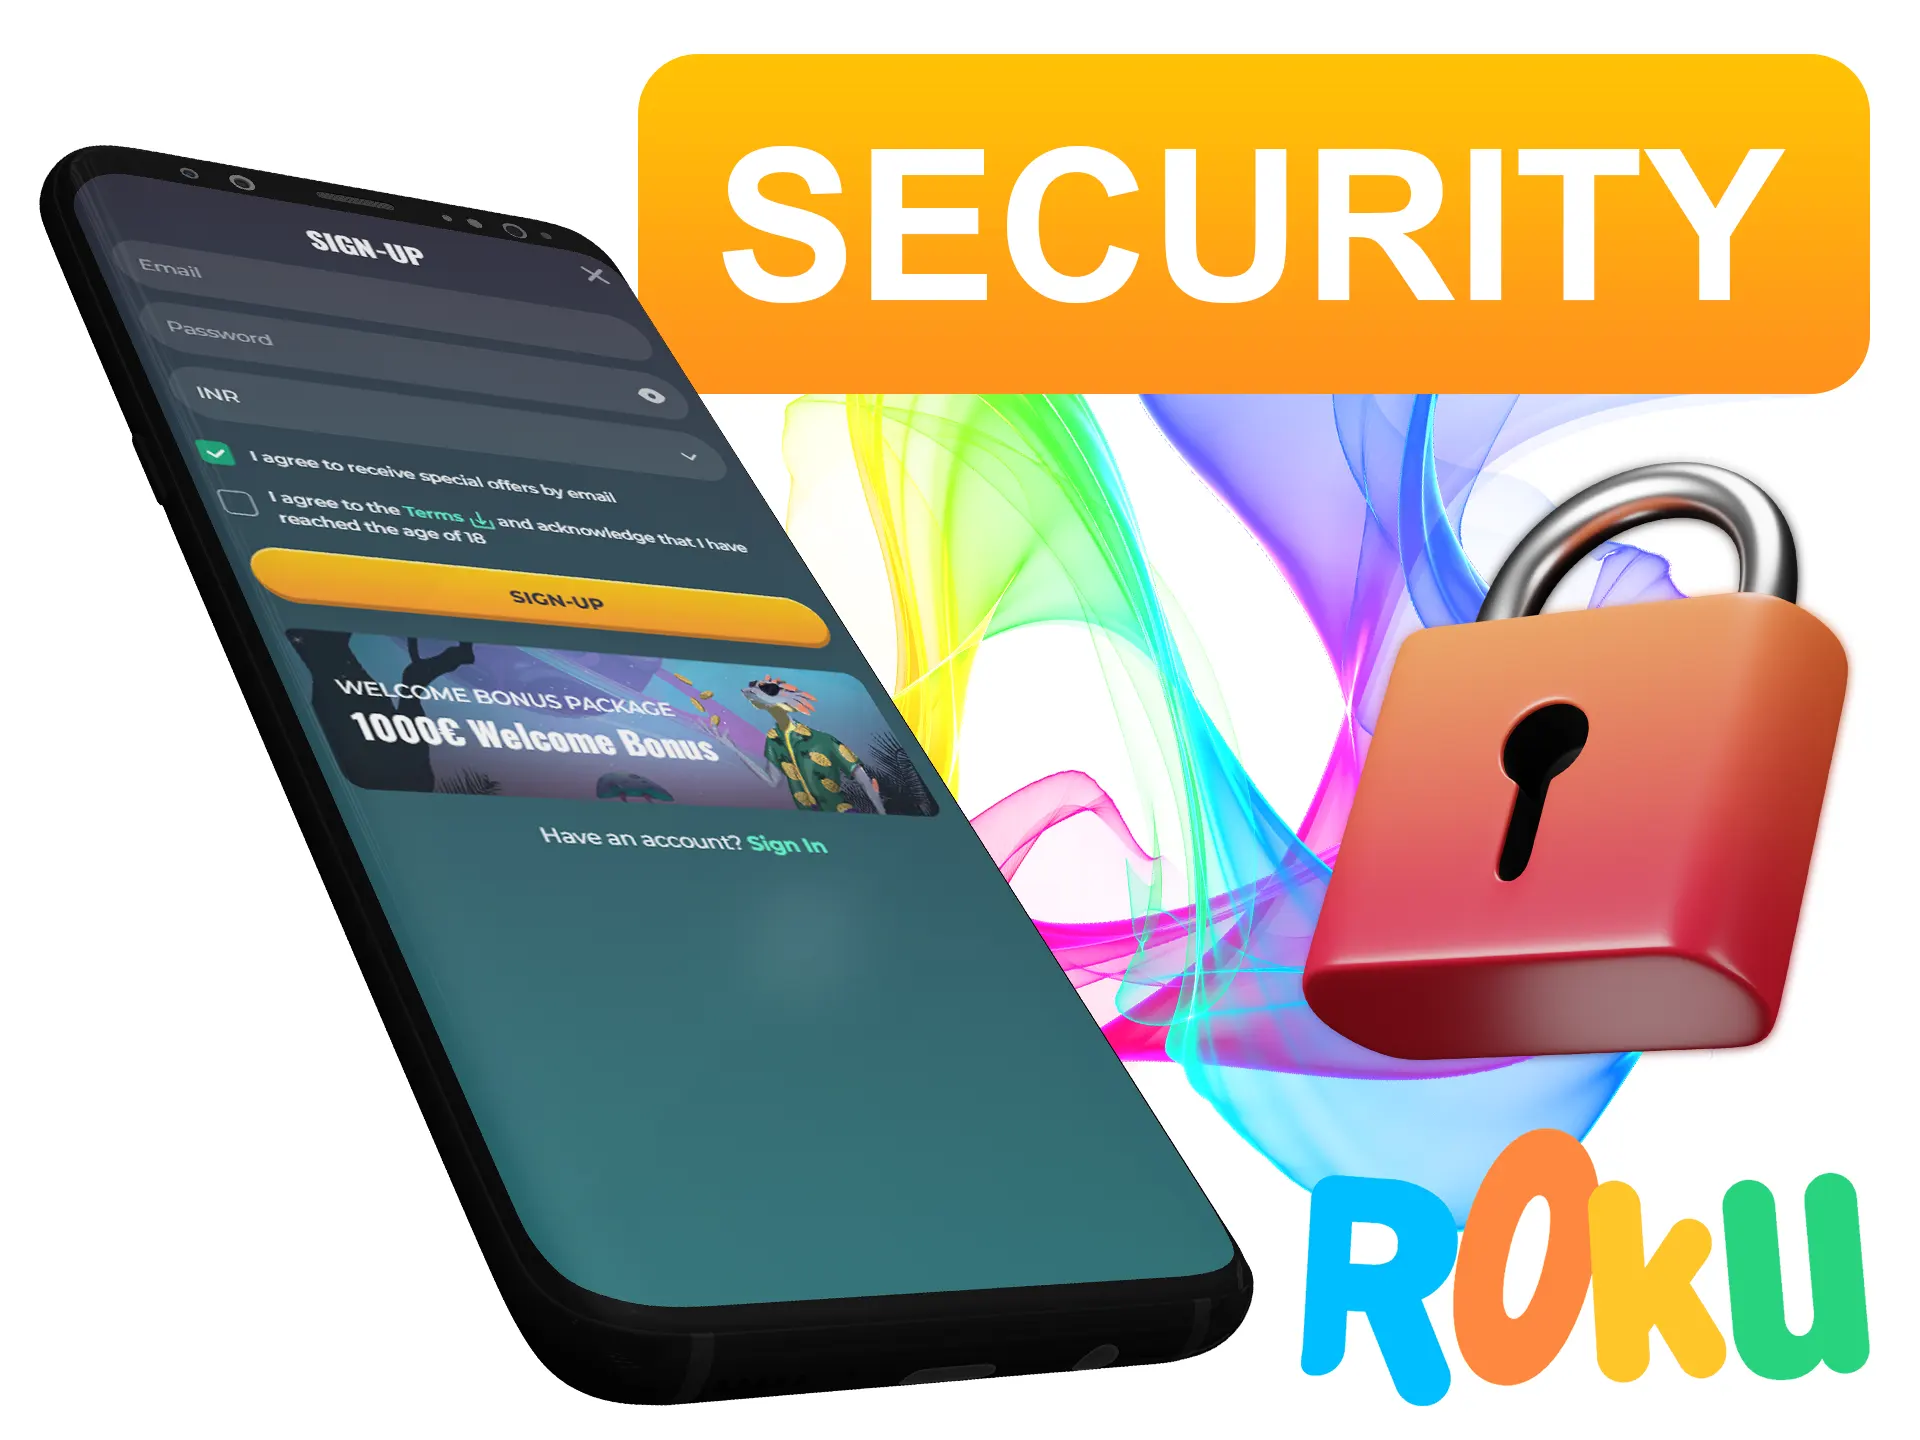 Your private date in safe at Rokubet.